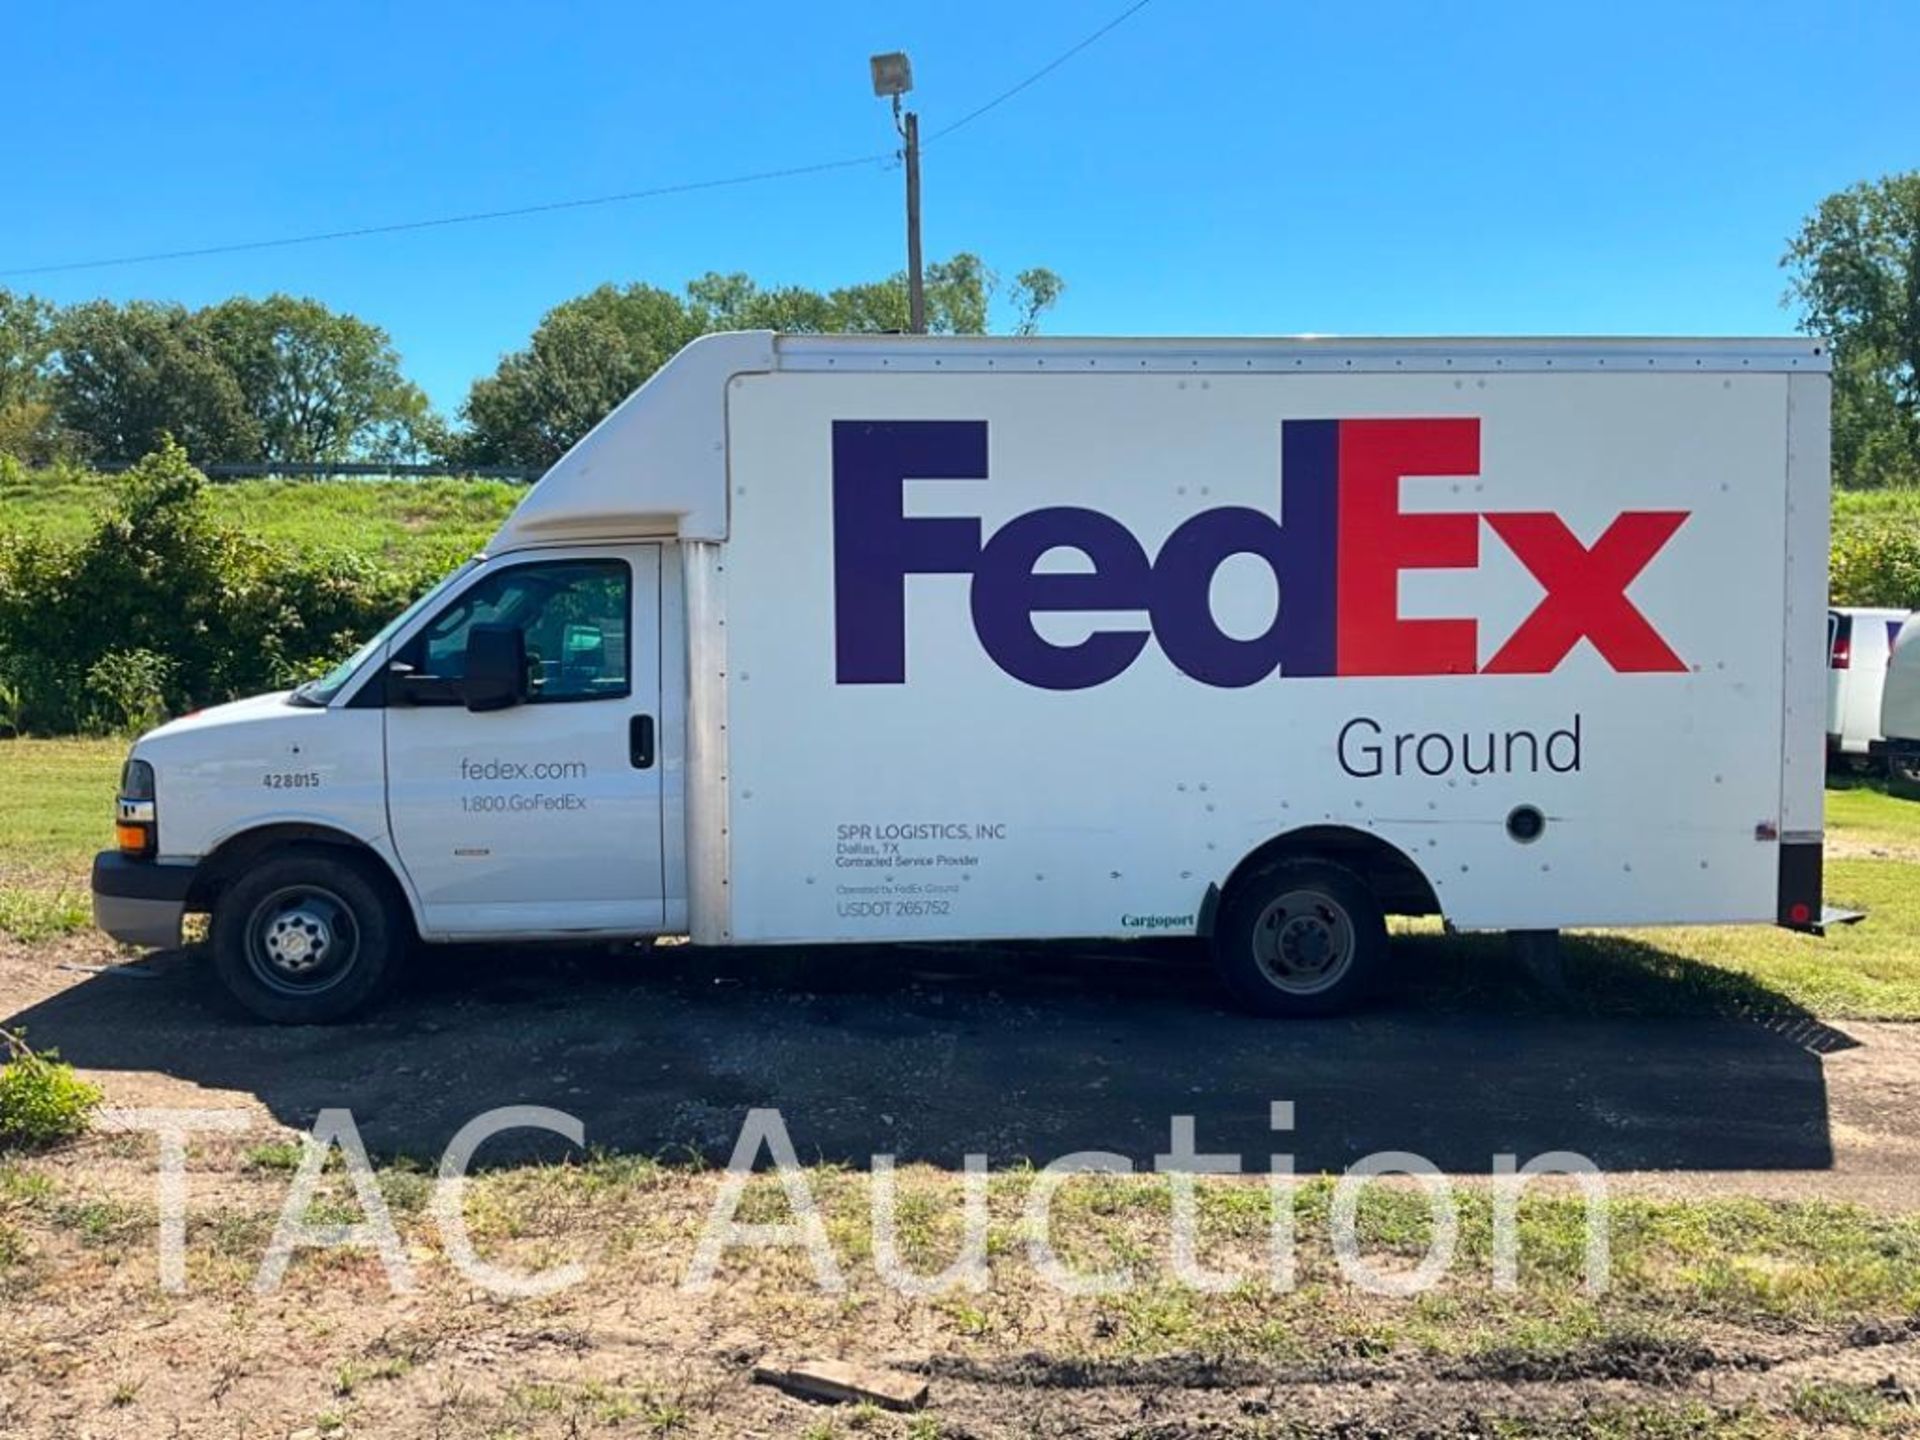 2019 Chevrolet Express 14ft Box Truck - Image 7 of 48